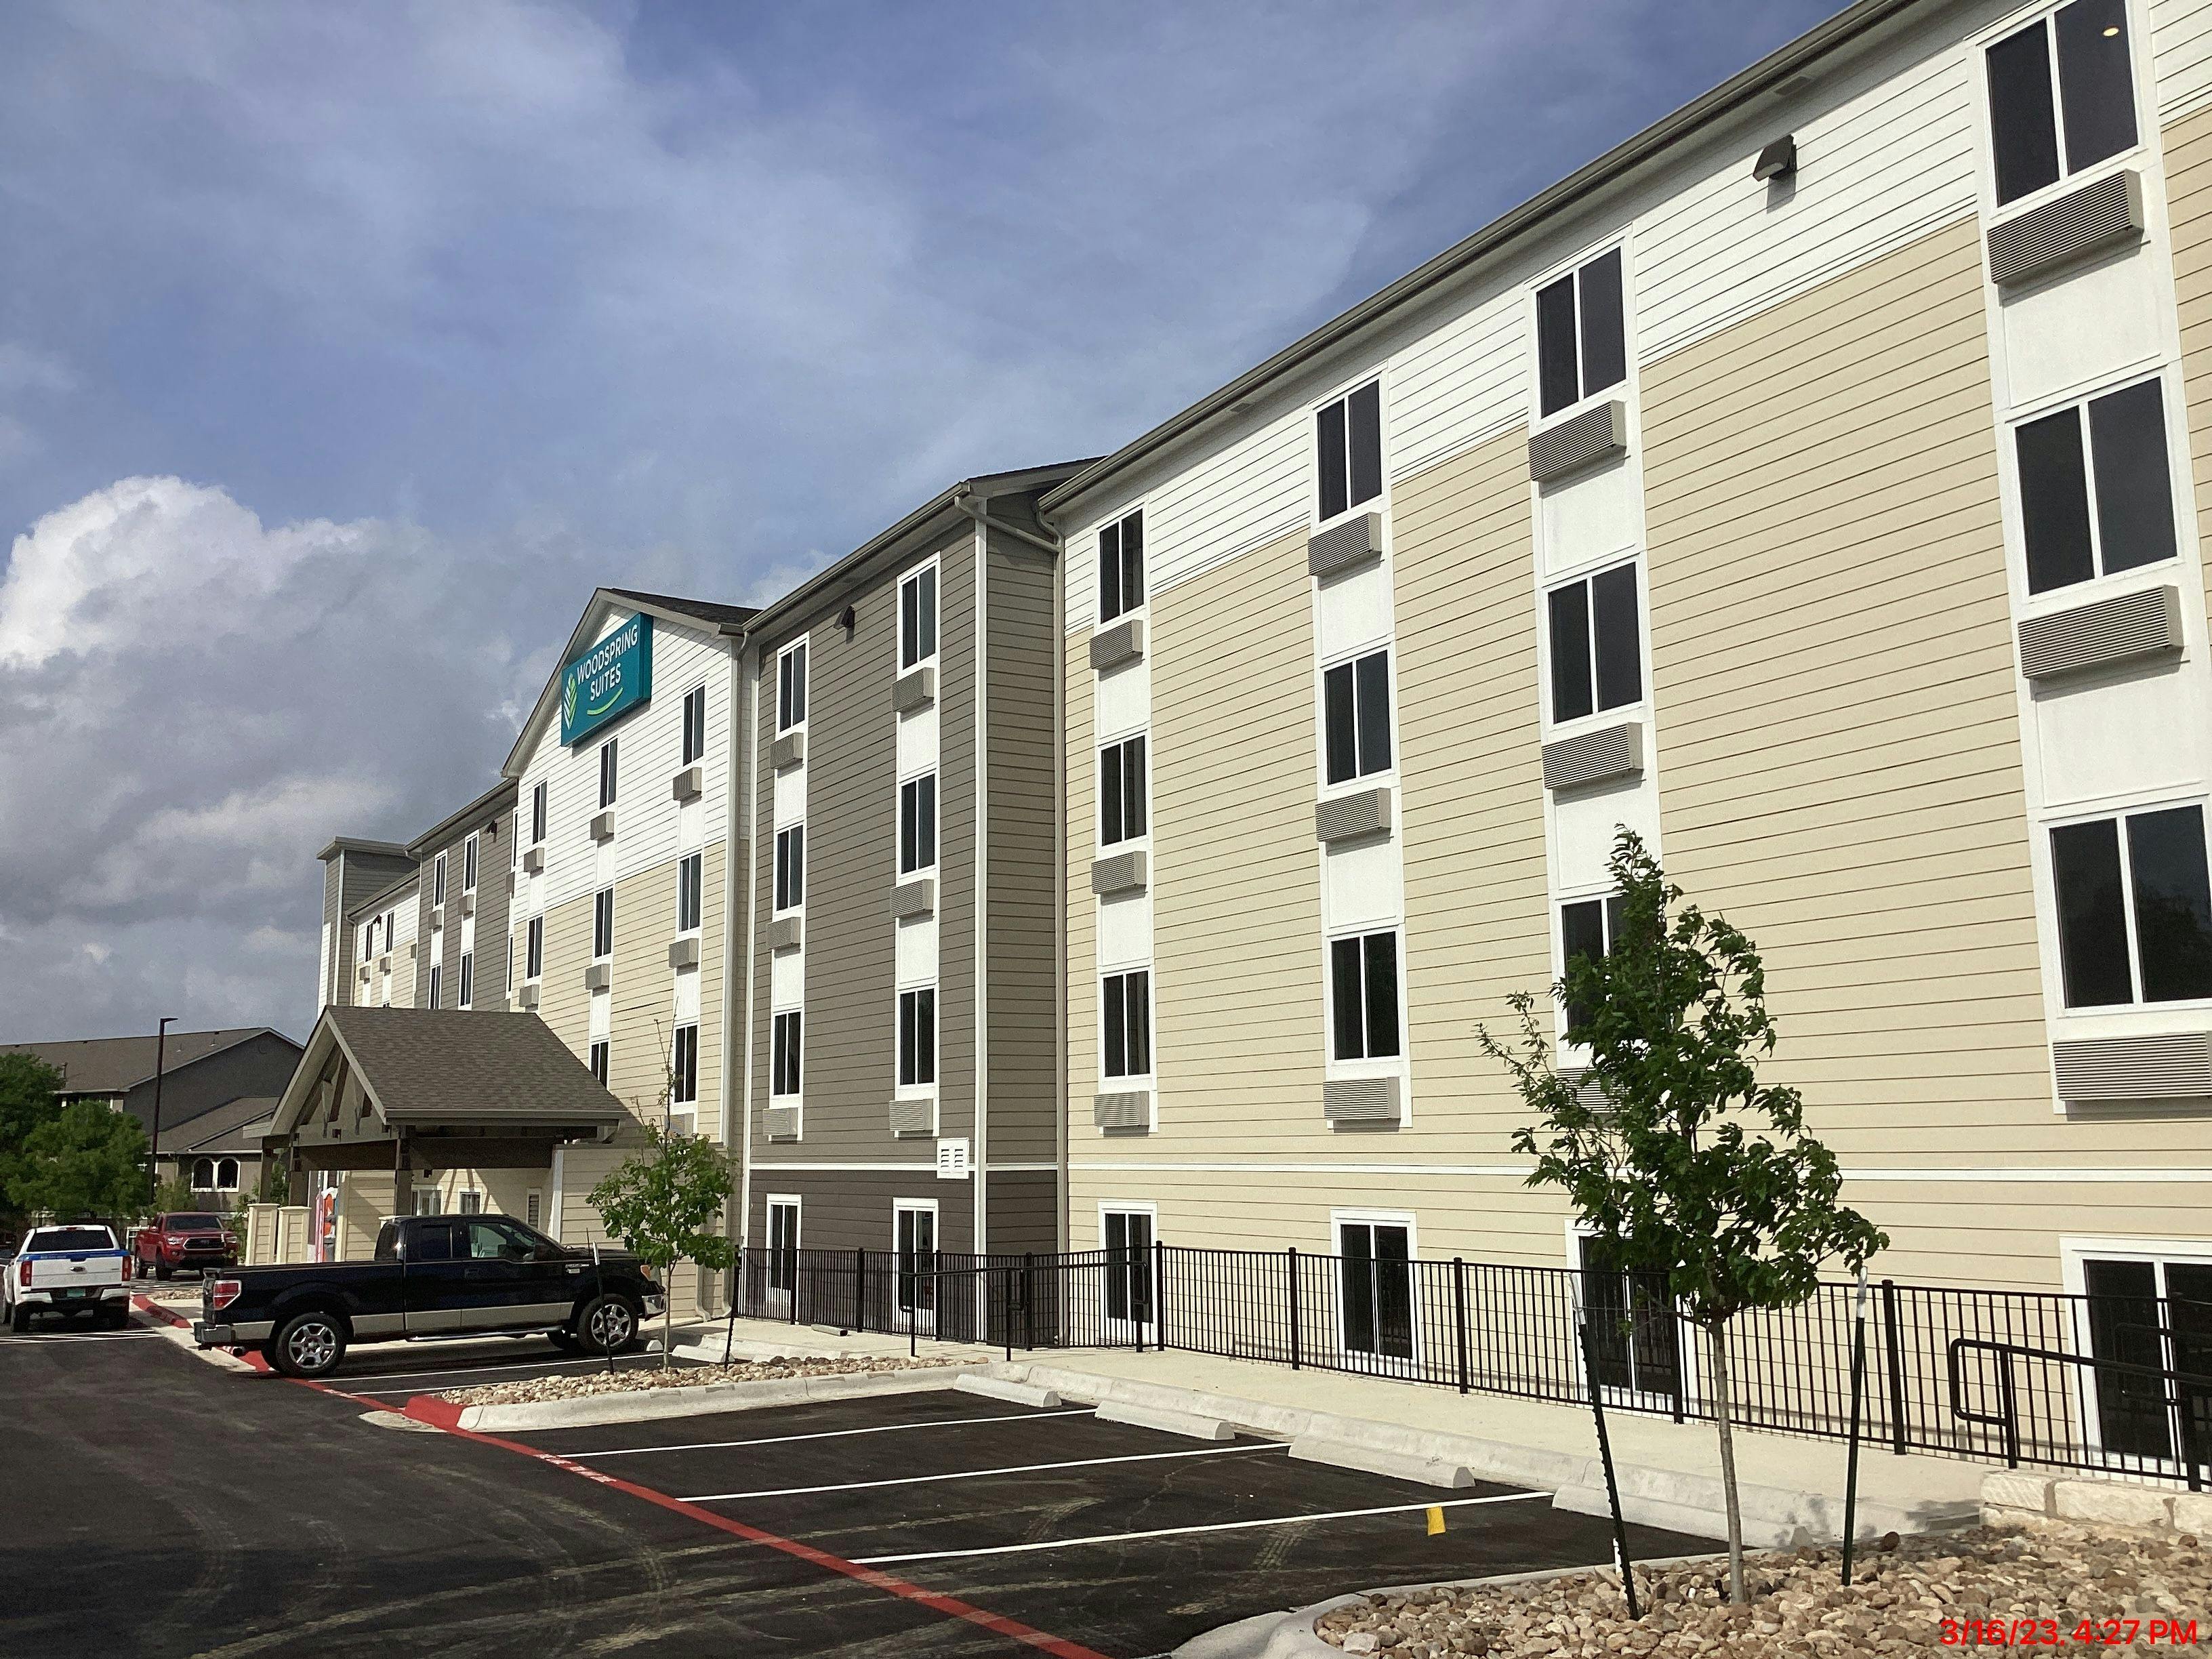 Exterior view of the front to the WoodSpring Suites hotel in Austin, TX.